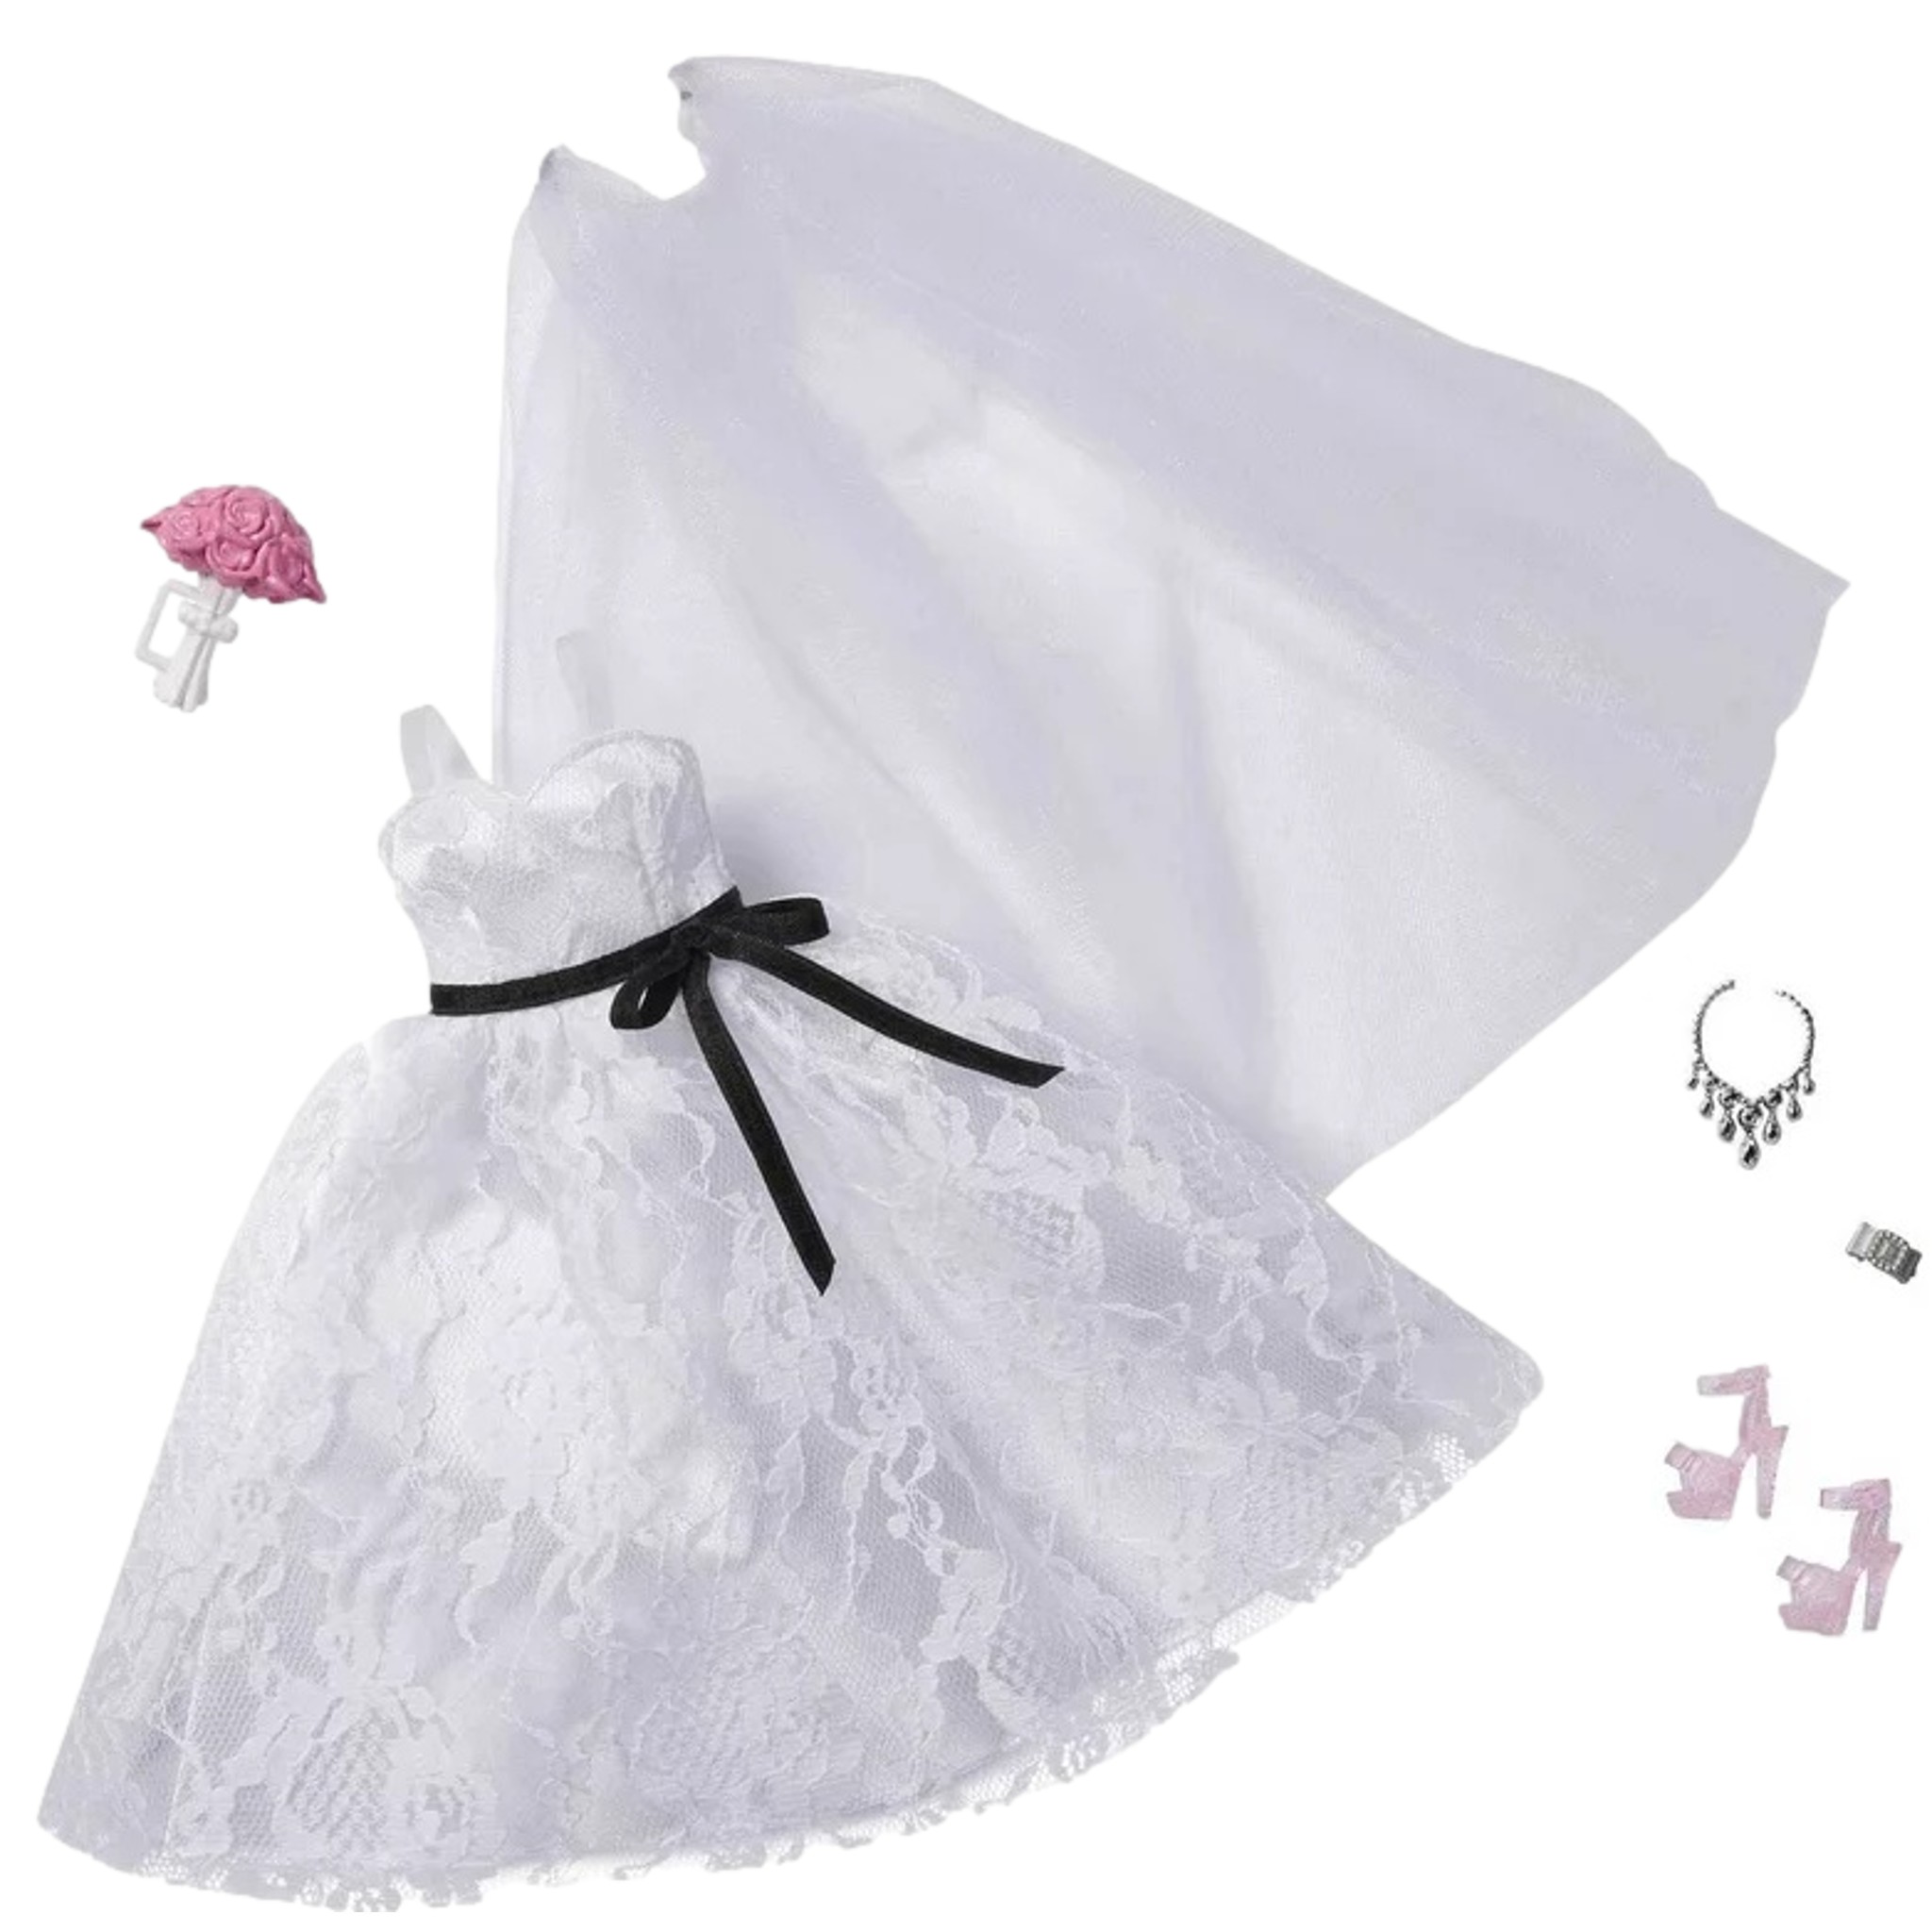 Barbie Wedding Fashion Pack Doll Clothes Set with Bridal Dress & 5 Accessories